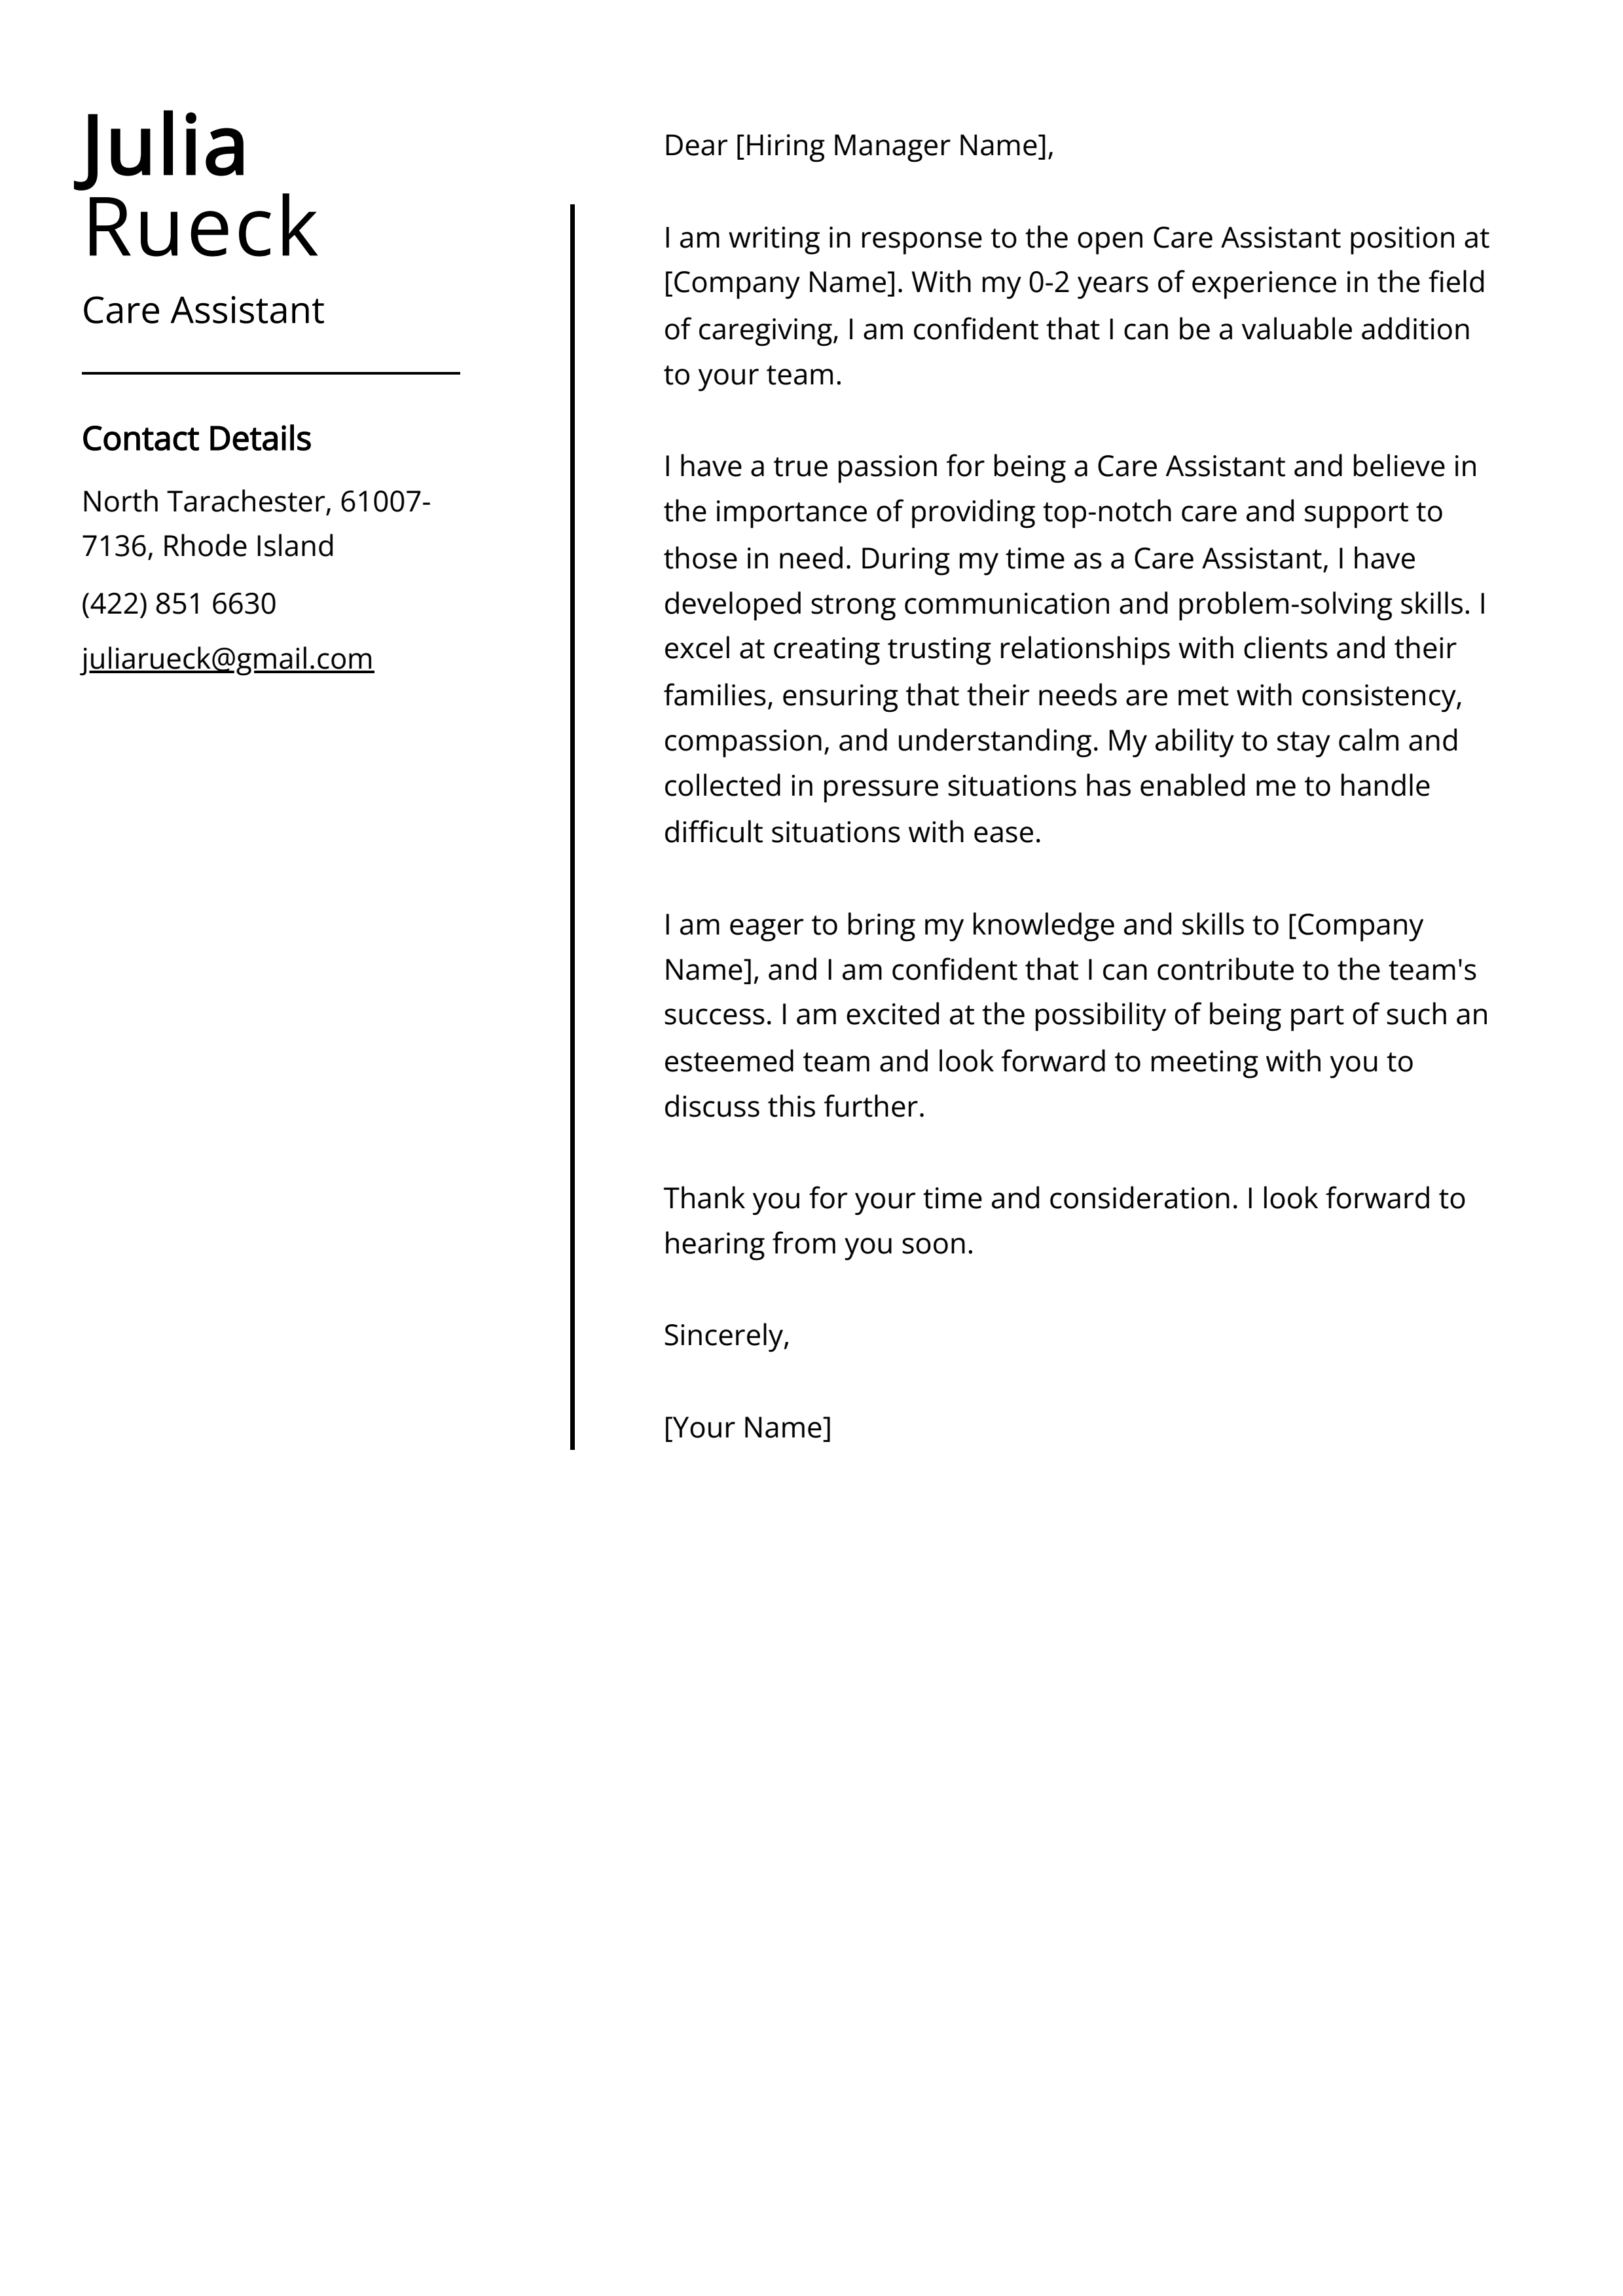 Care Assistant Cover Letter Example